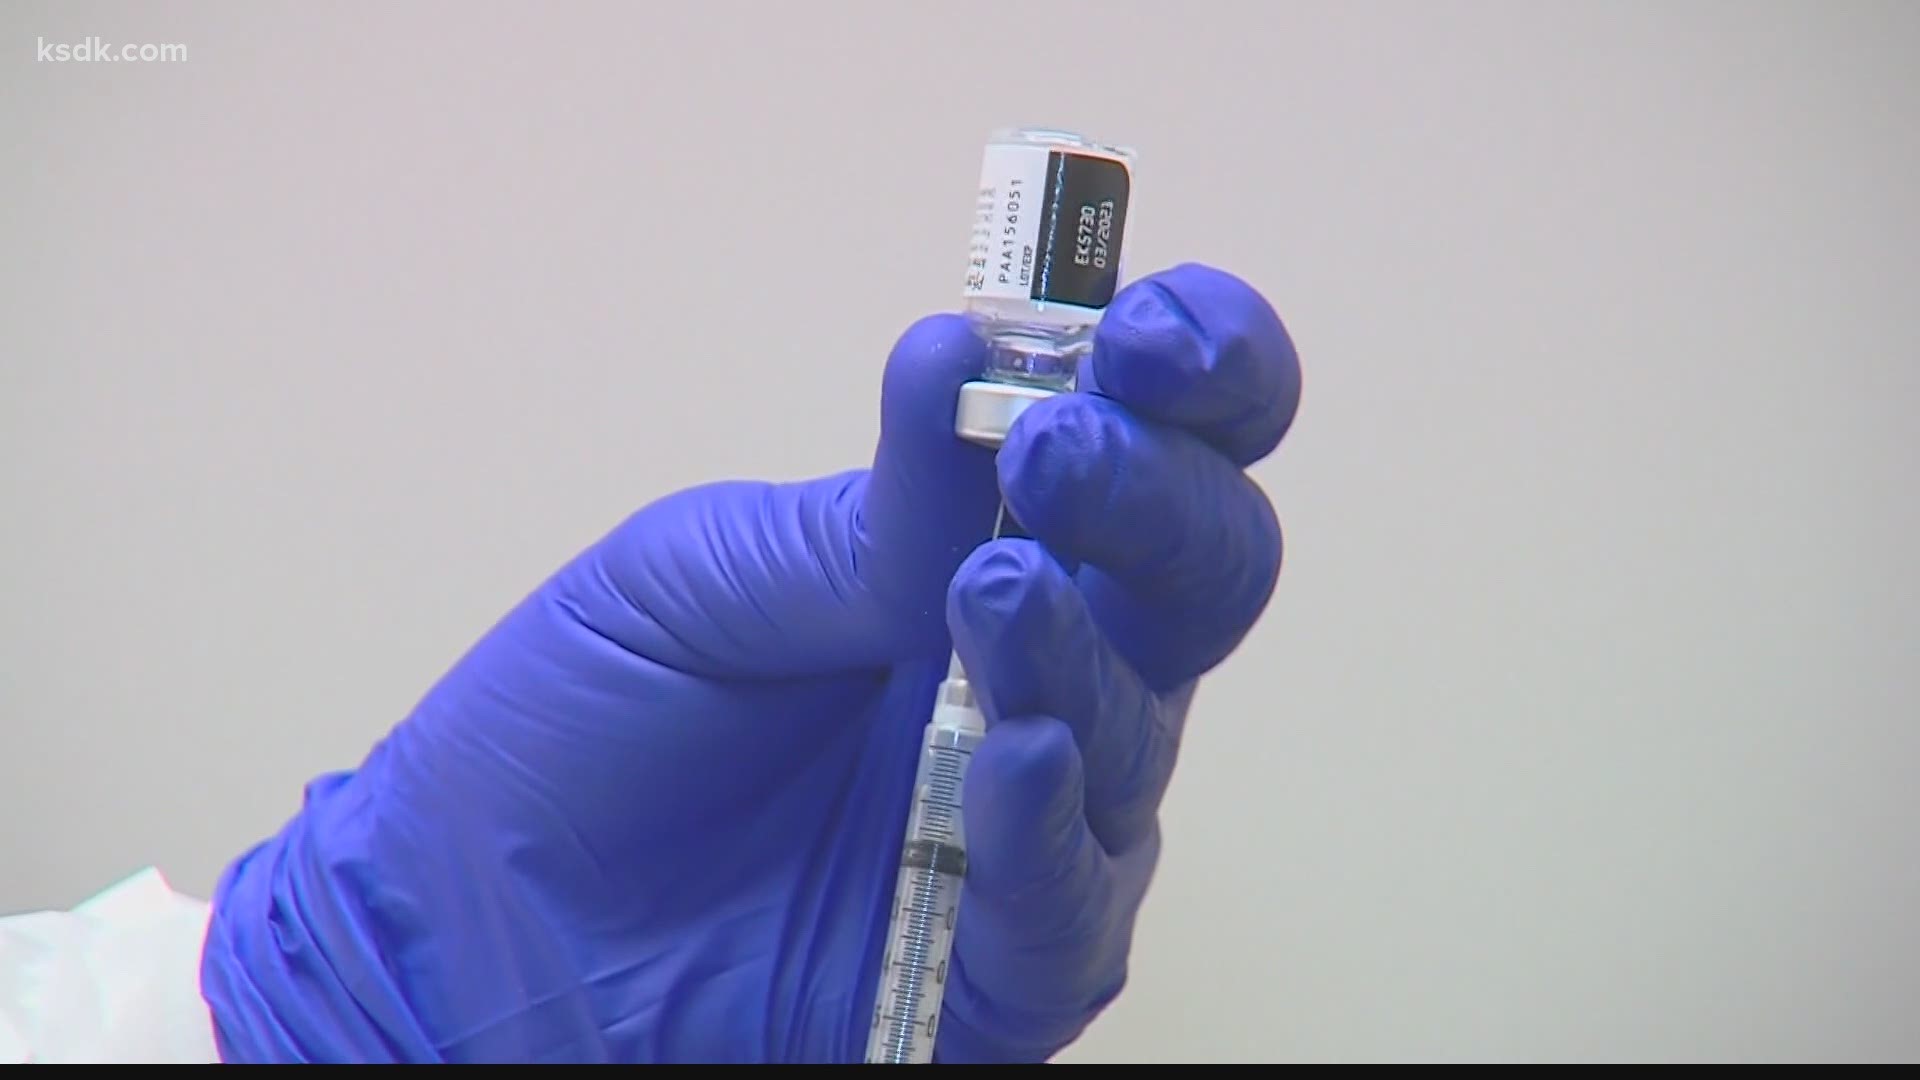 Missouri is getting ready for activation of Phase 1B - Tier 2 of the state’s COVID-19 vaccine rollout, Monday.